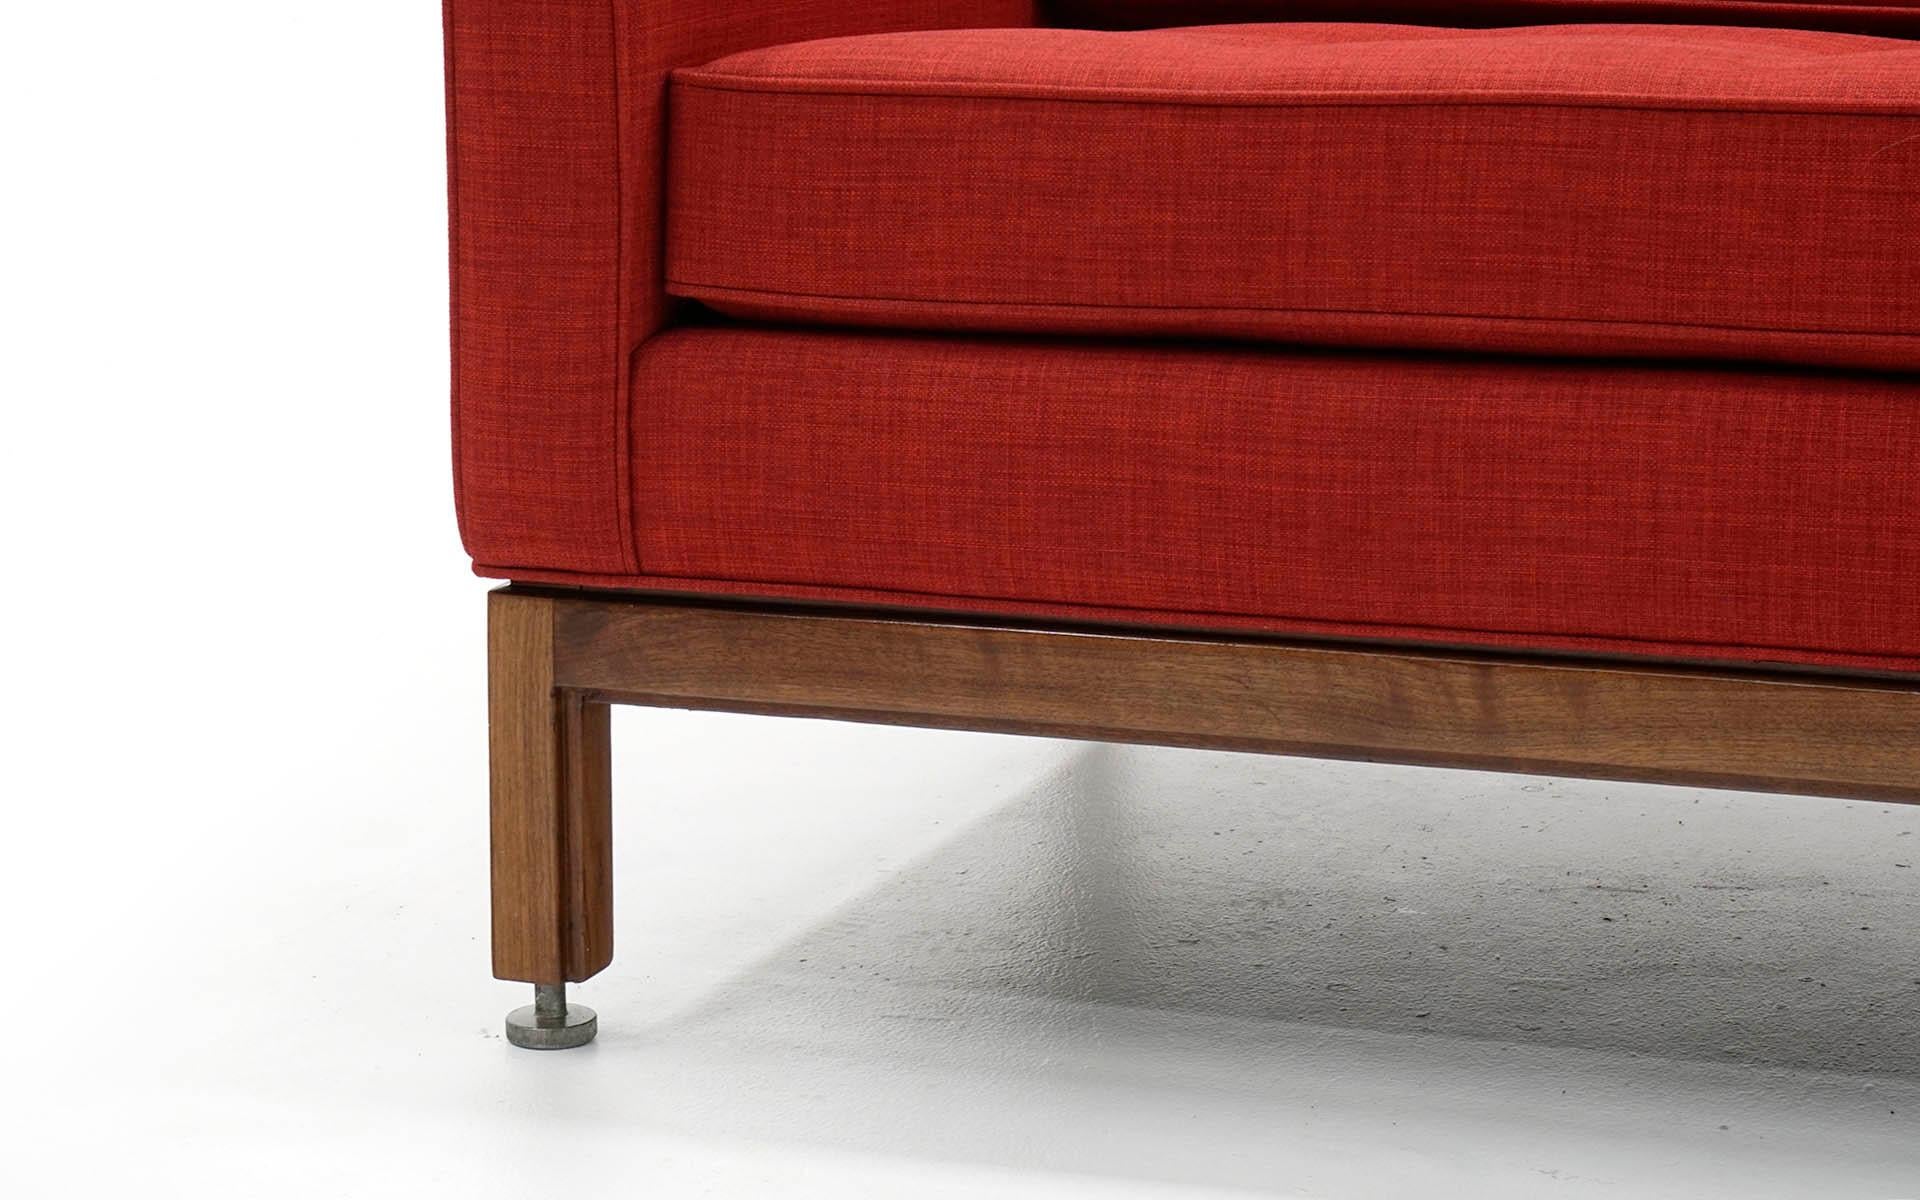 American Red Three-Seat Sofa with Walnut Frame by Jens Risom, Expertly Restored